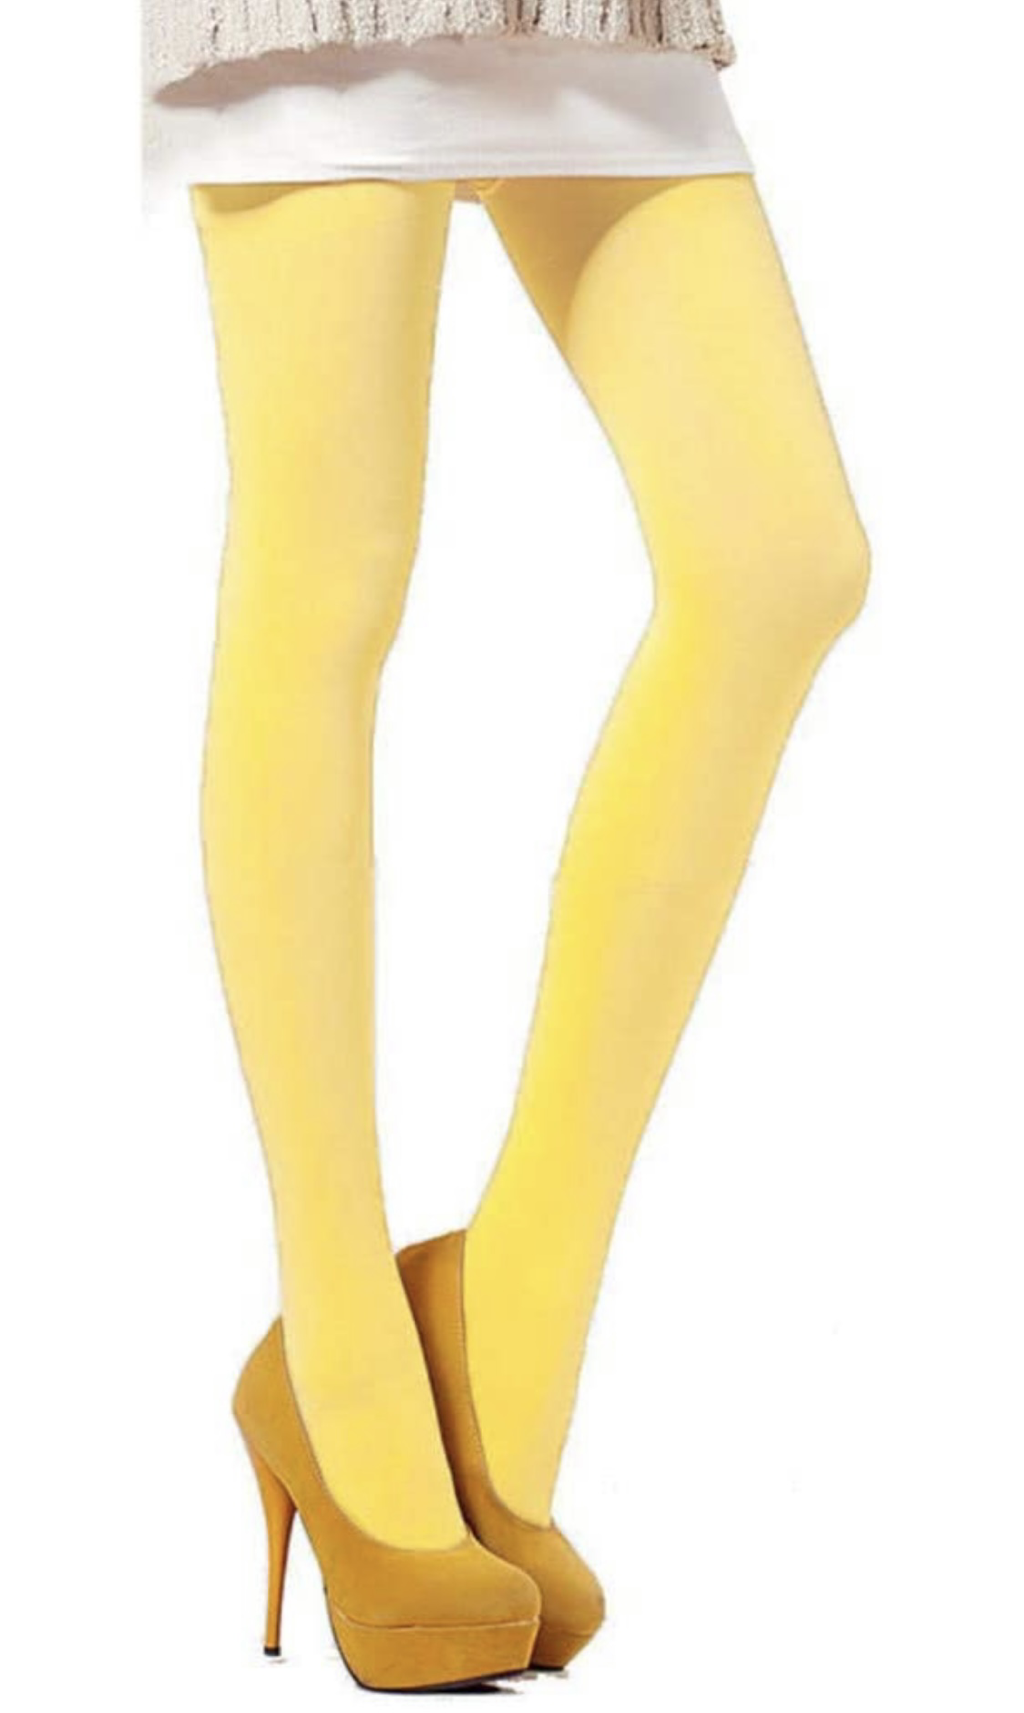 NVUNDG Sexy Seamless Opaque Footed Tights - Fashion Tights